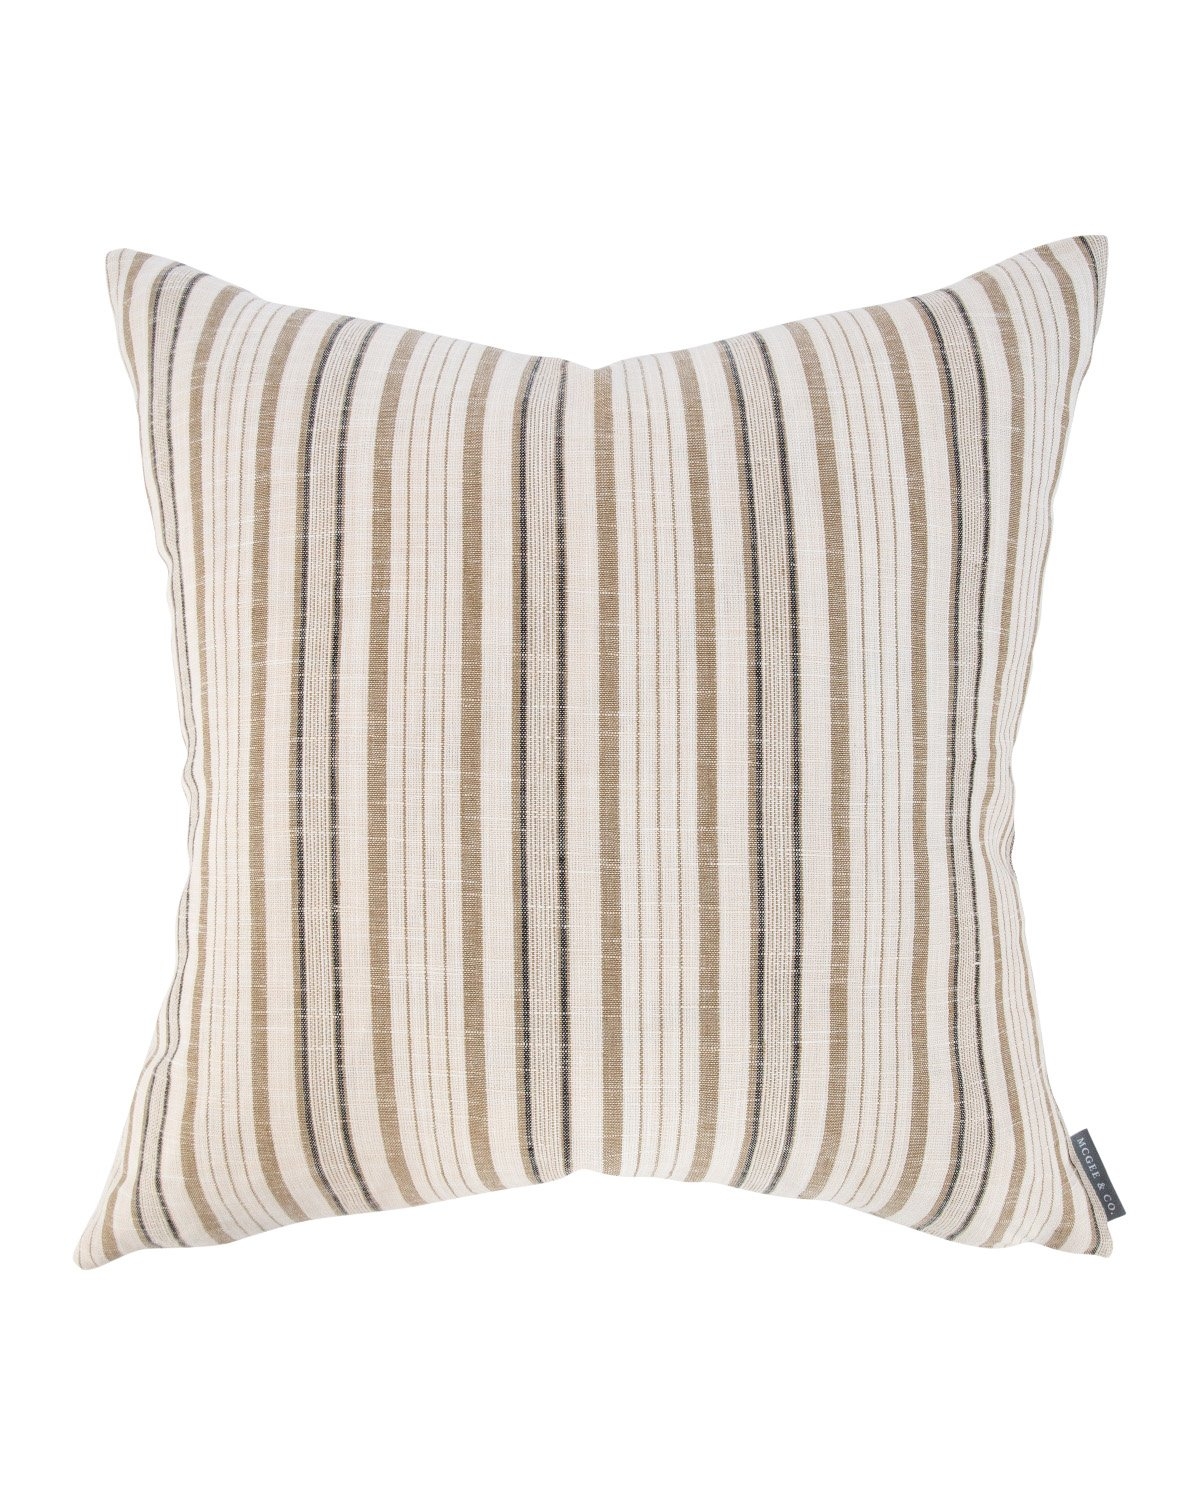 ARCHIE PILLOW WITHOUT INSERT, CAMEL, 22" x 22" - Image 0